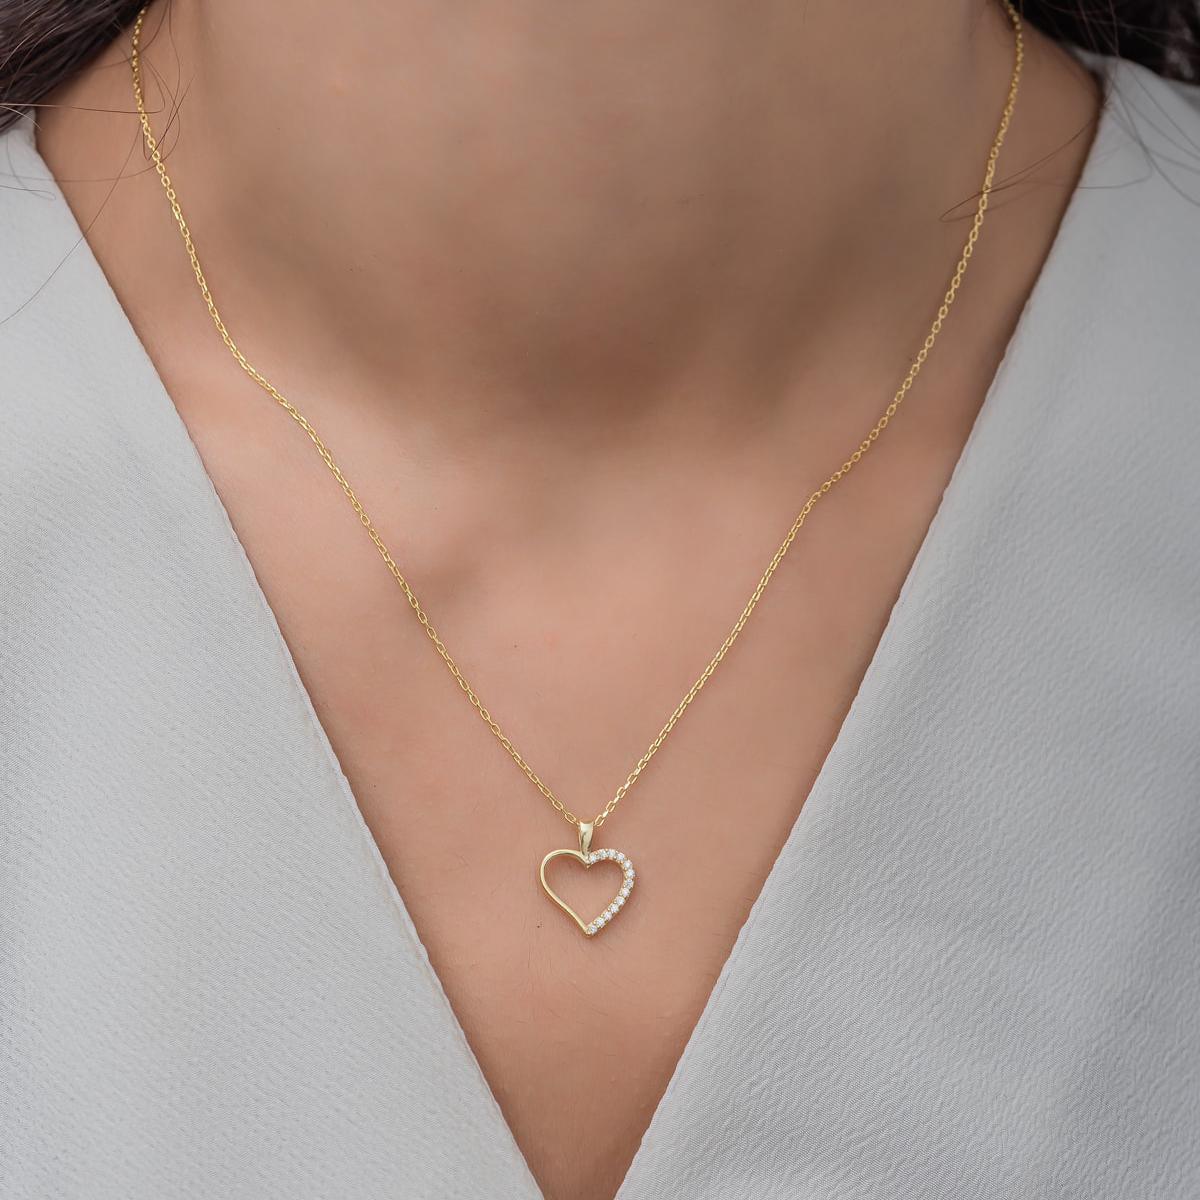 Heart Necklace Gold • Open Heart Necklace • Heart Necklace Diamond - Trending Silver Gifts